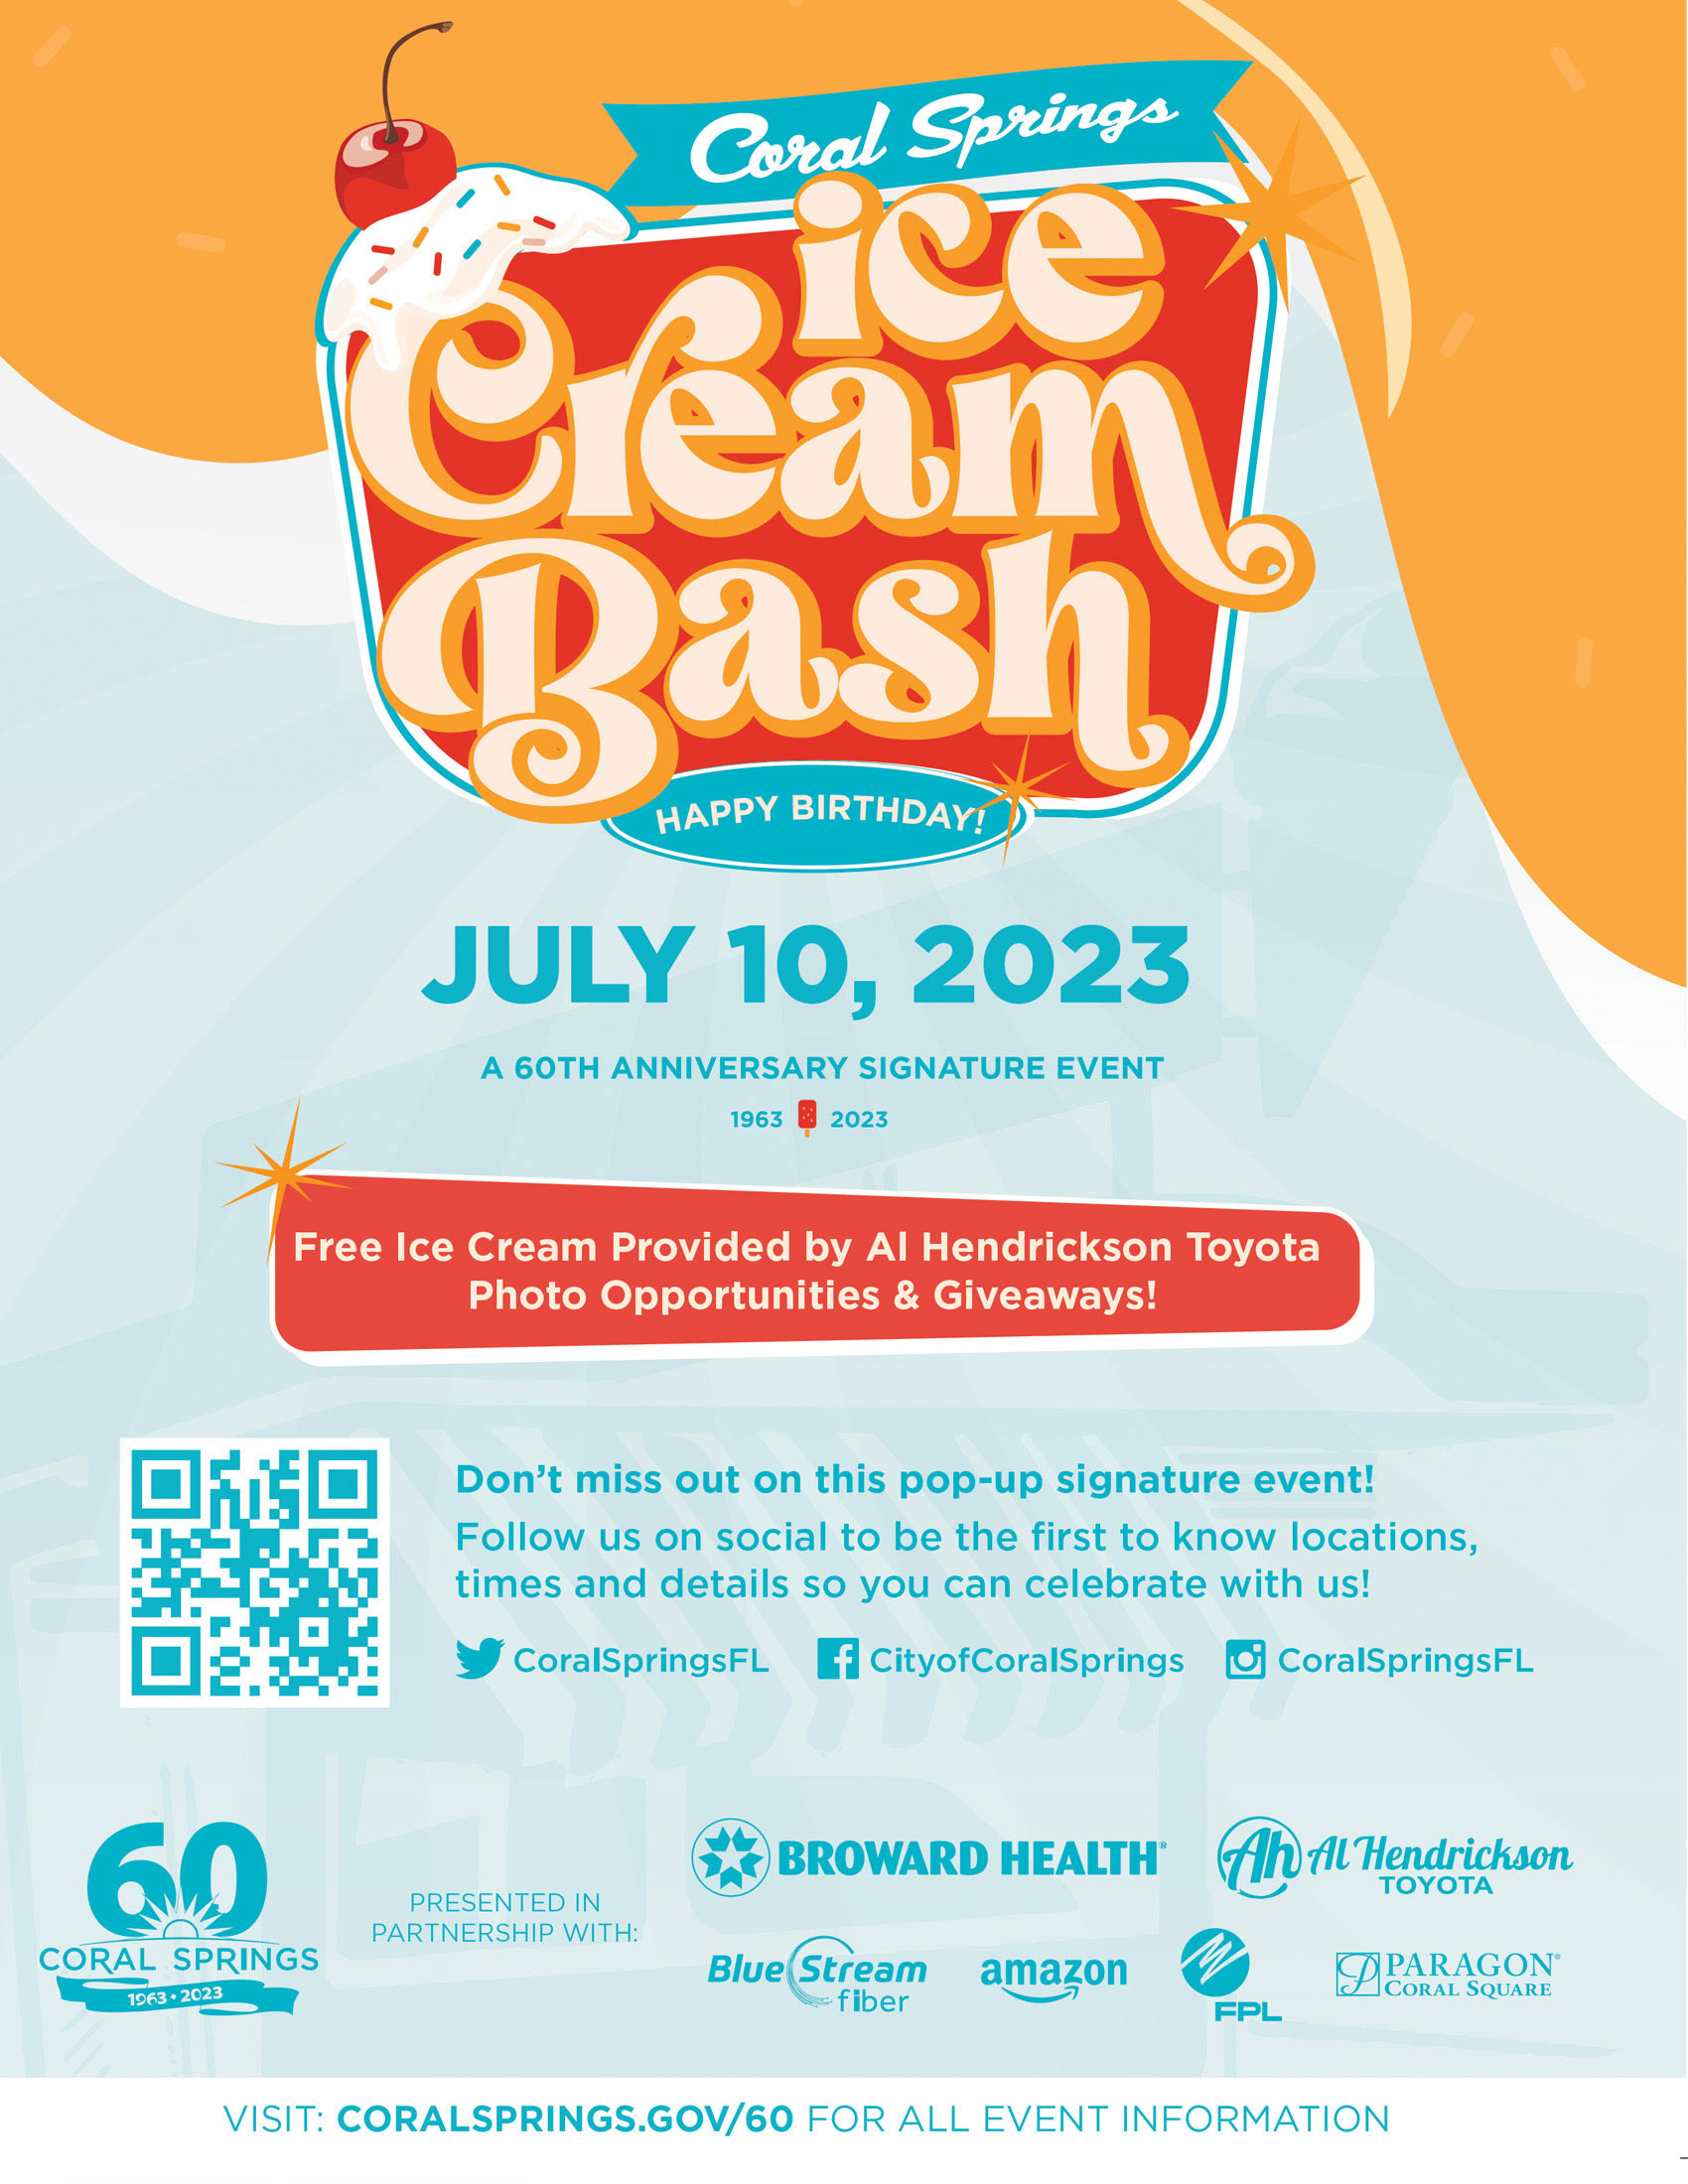 City-of-Coral-Springs-IceCream-Bash-ad